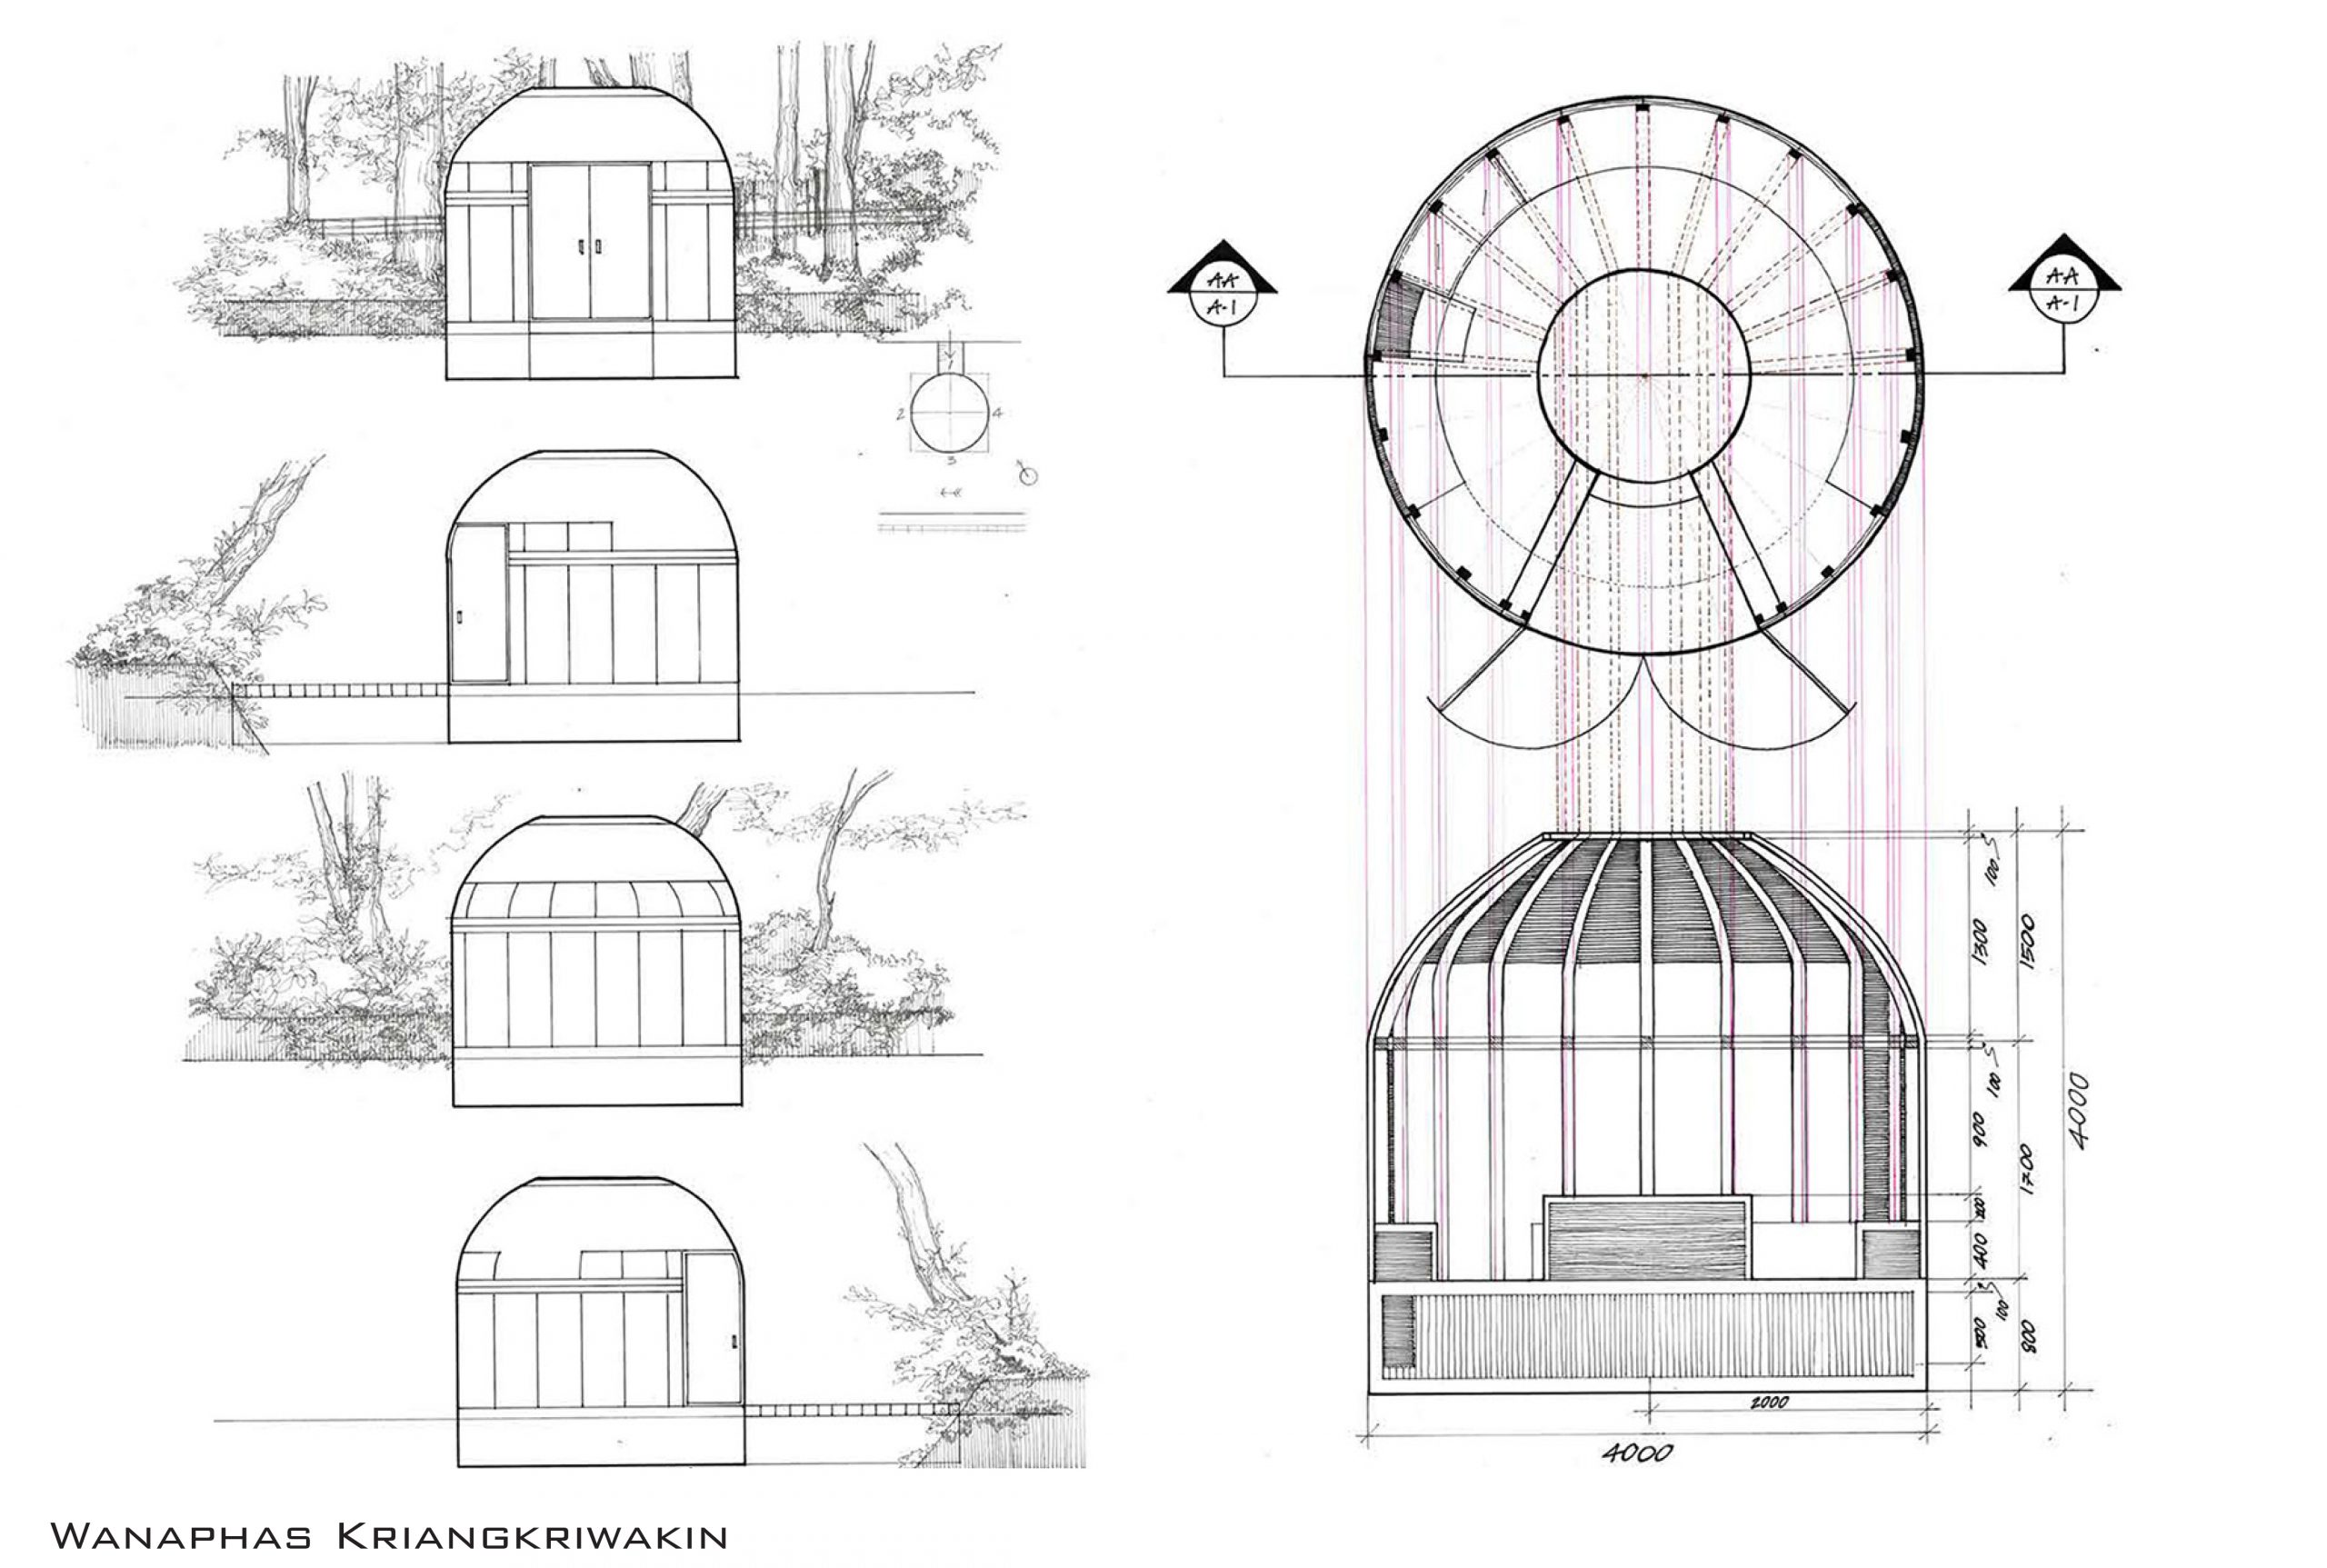 Floor plans, sections and elevations of musician's creative shelter